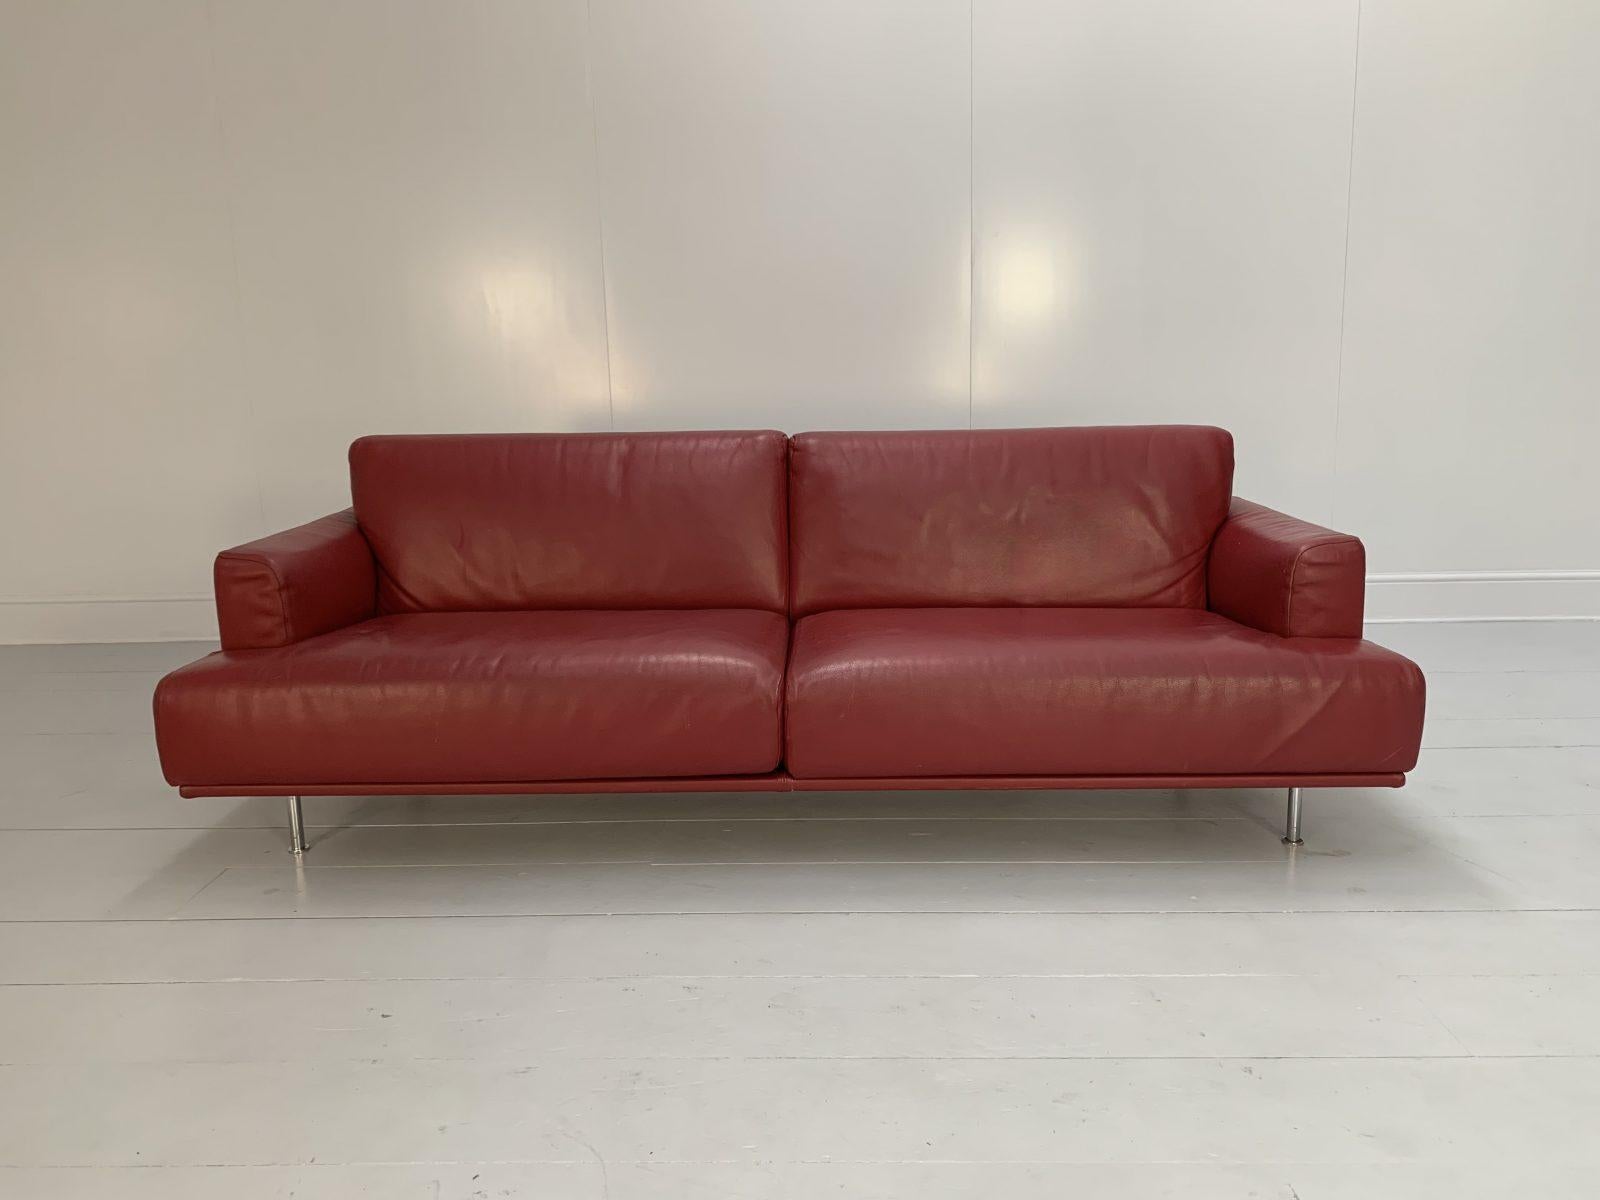 Cassina “253 Nest” 2.5-Seat Sofa & Bench Footstool – In Red “Pelle” Leather 2